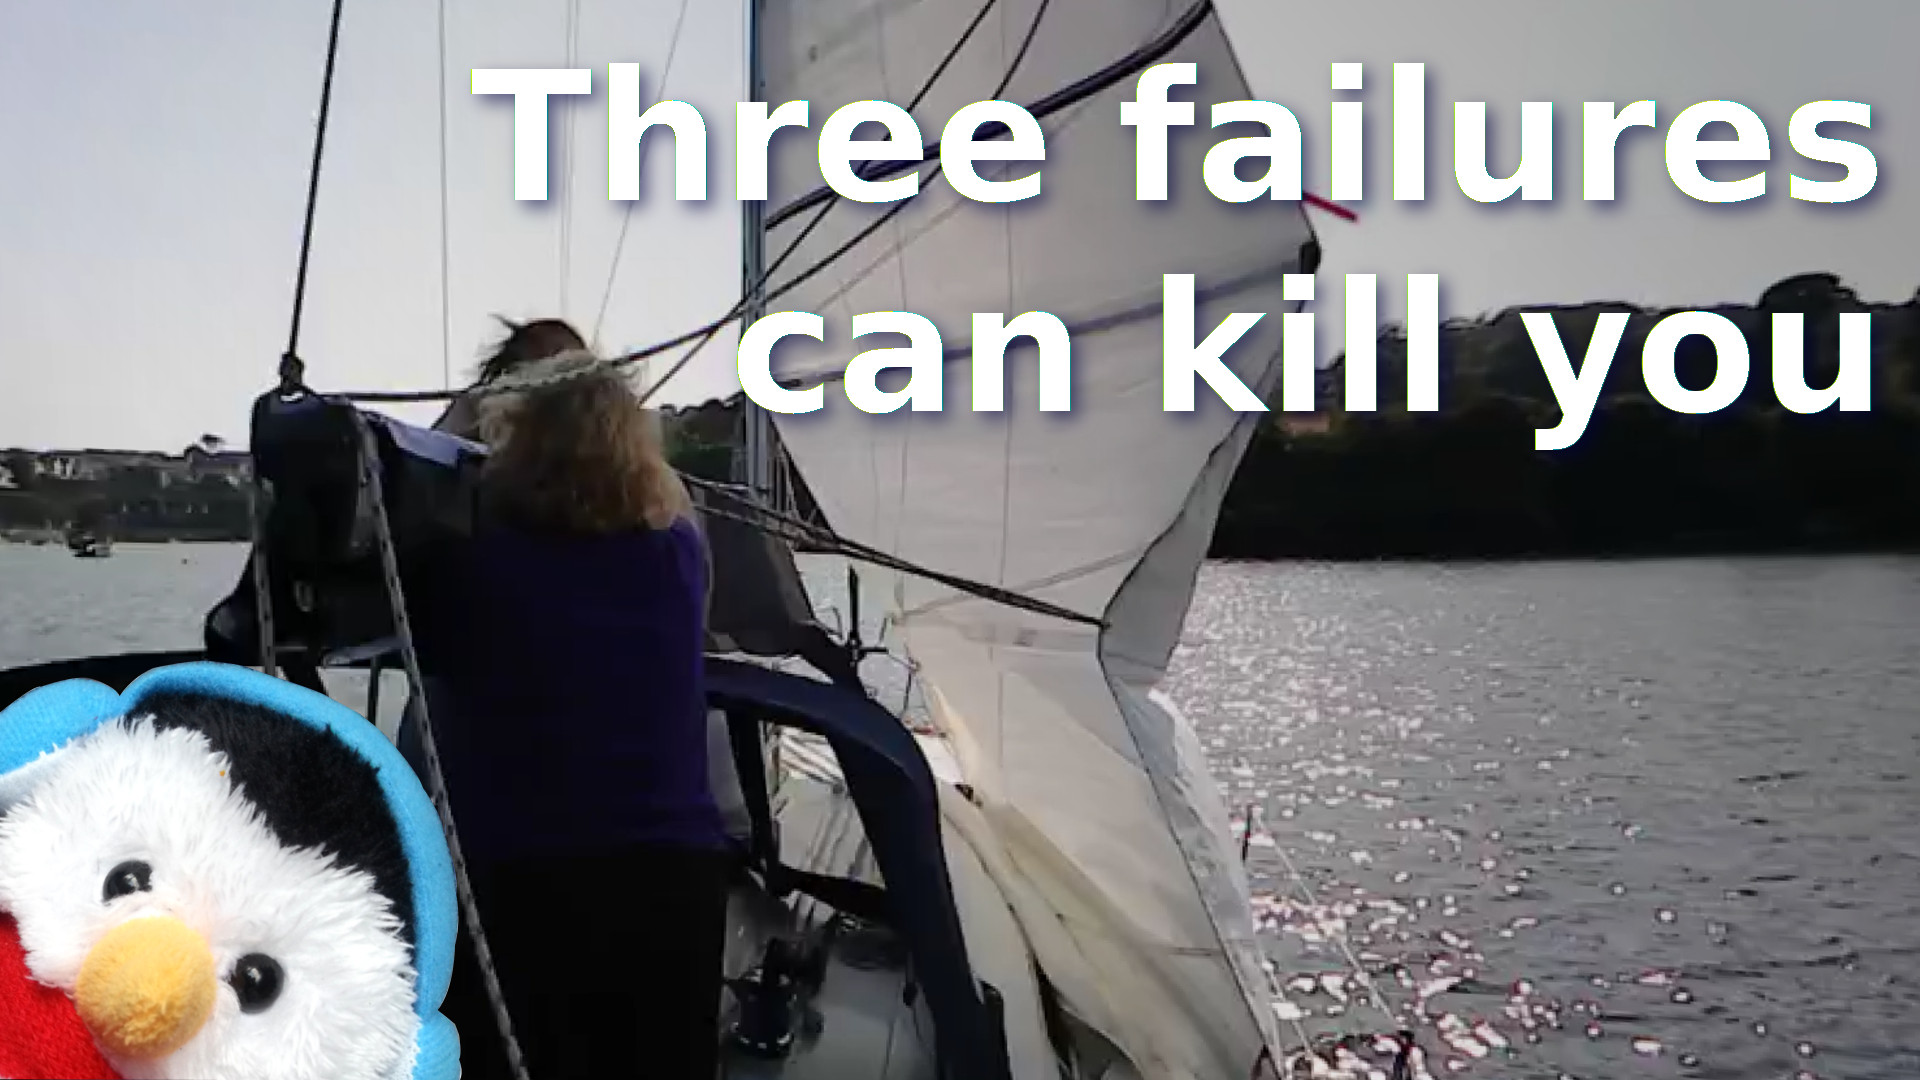 Watch our "Three failures can kill you" video and add comments